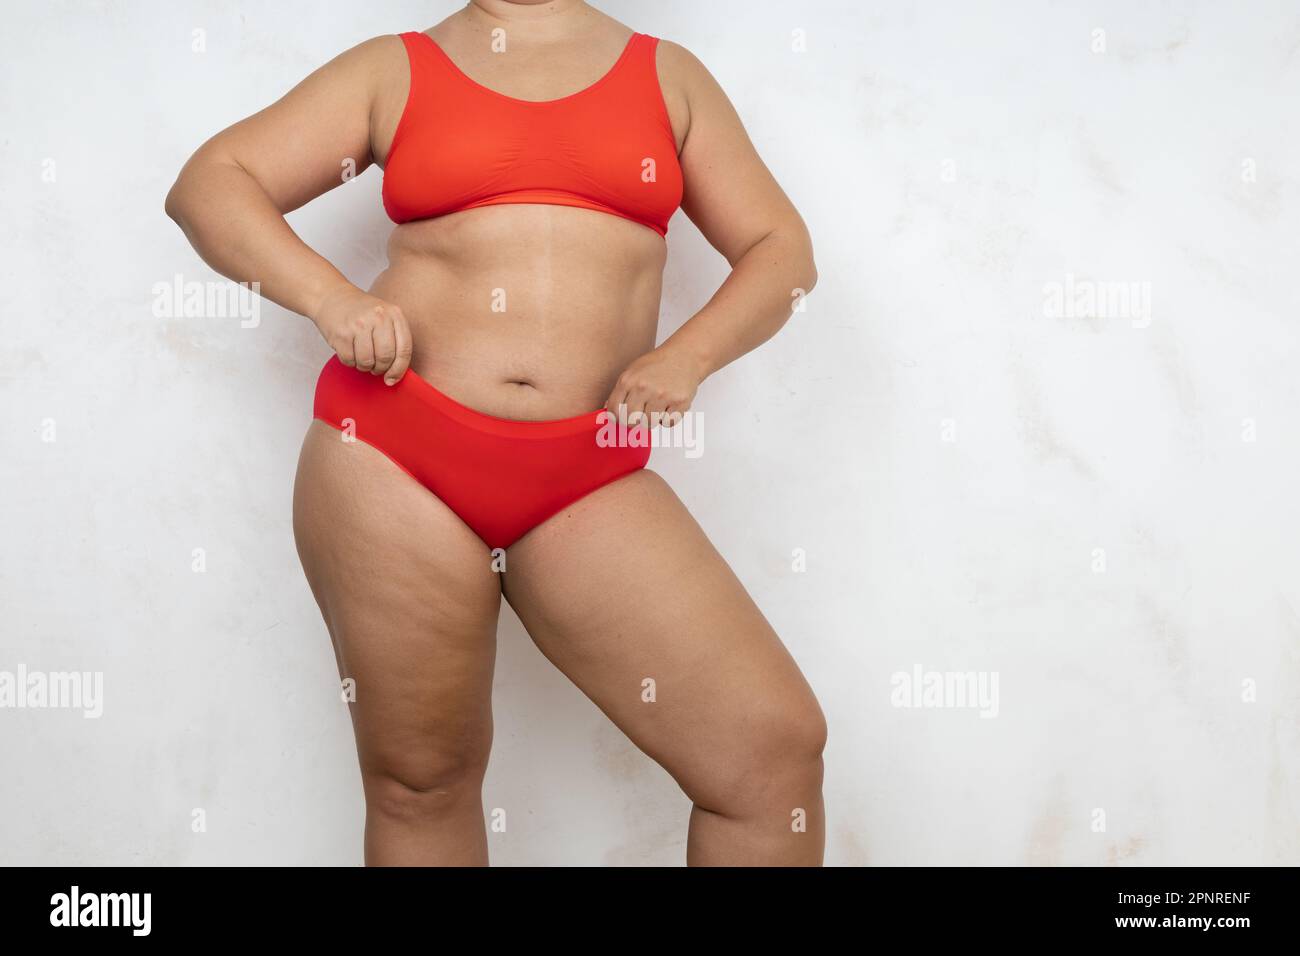 Overweight woman pull slimming underpants over large belly side